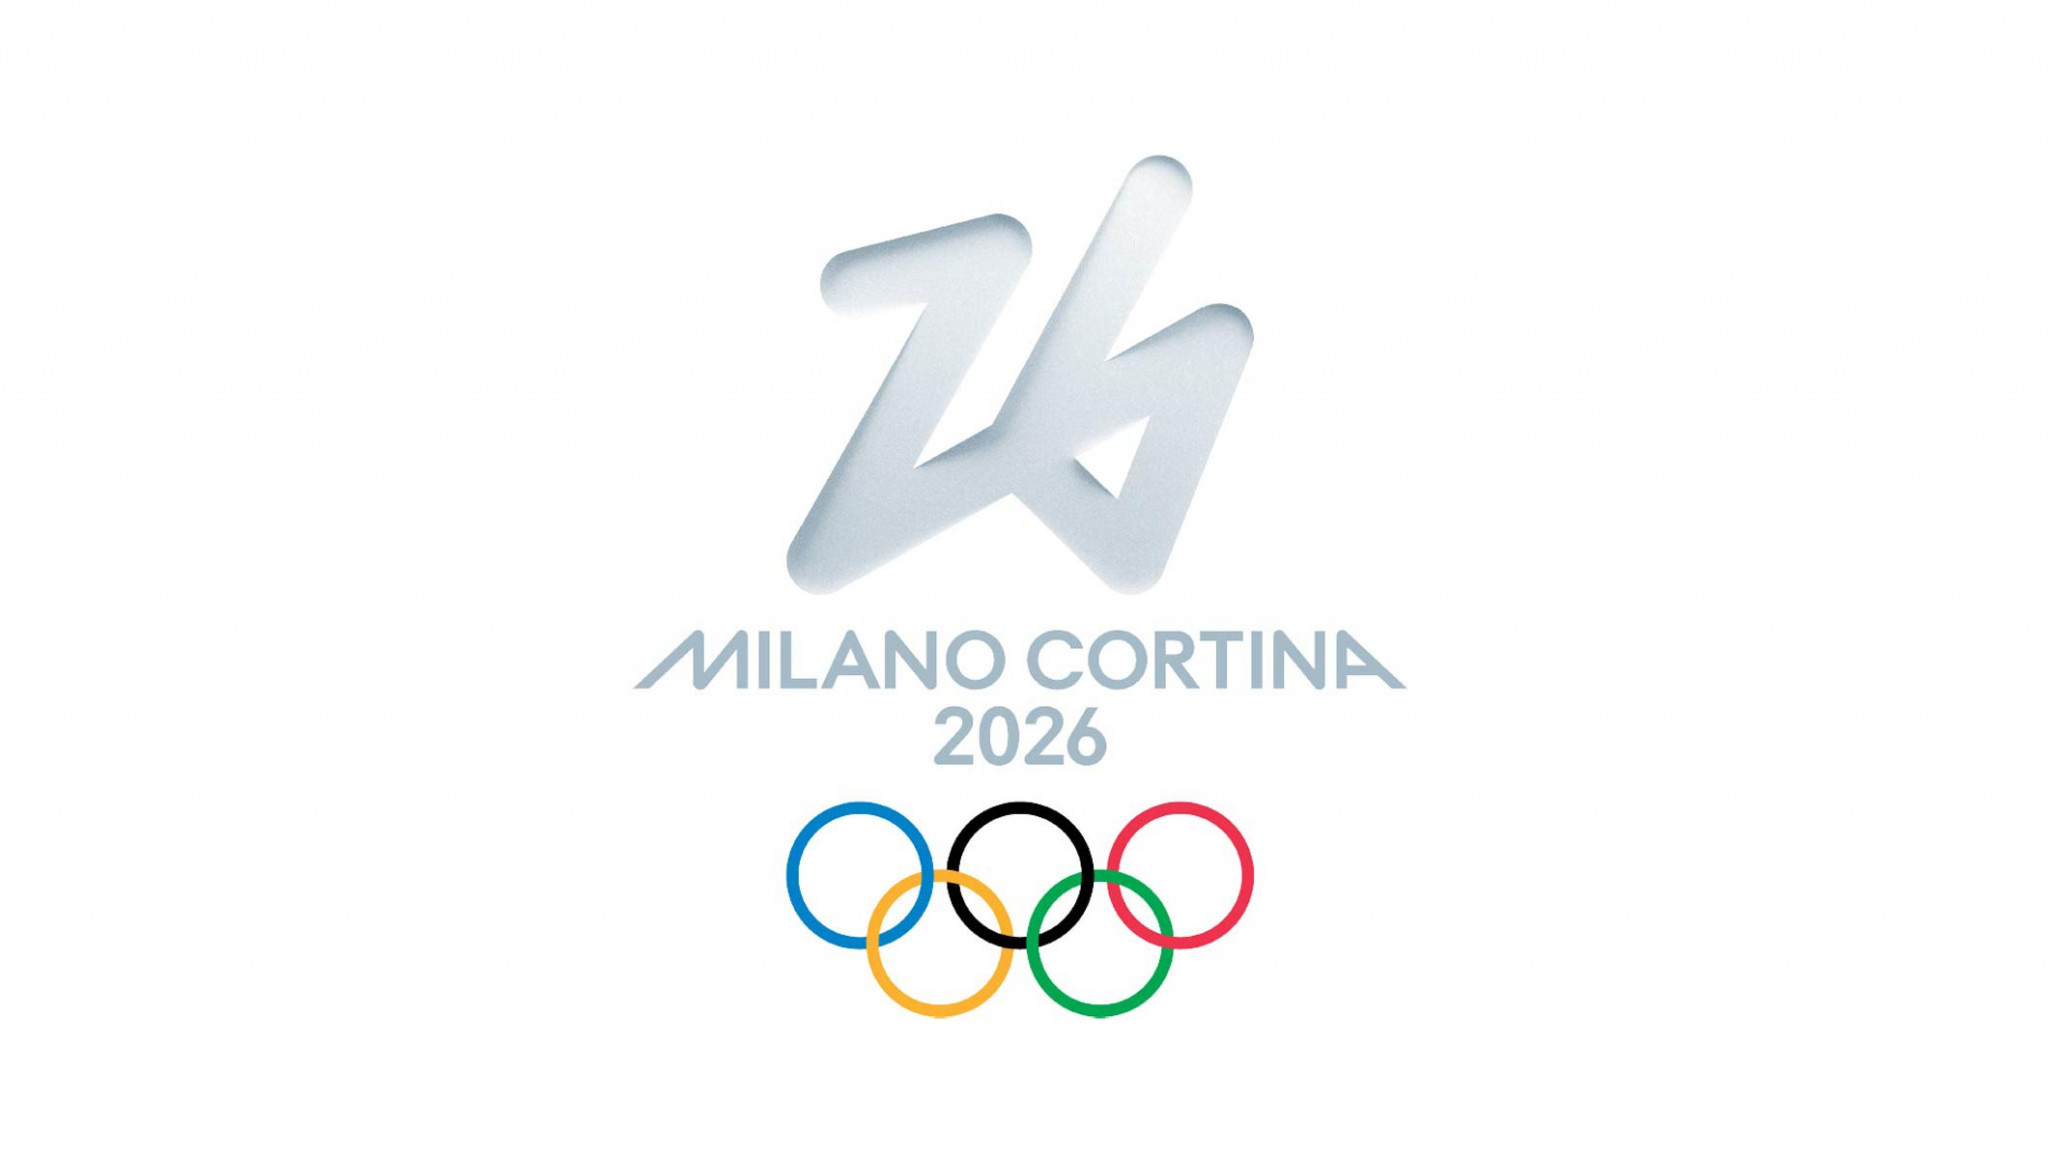 The Milan Cortina 2026 logo was also decided by a public vote ©Getty Images